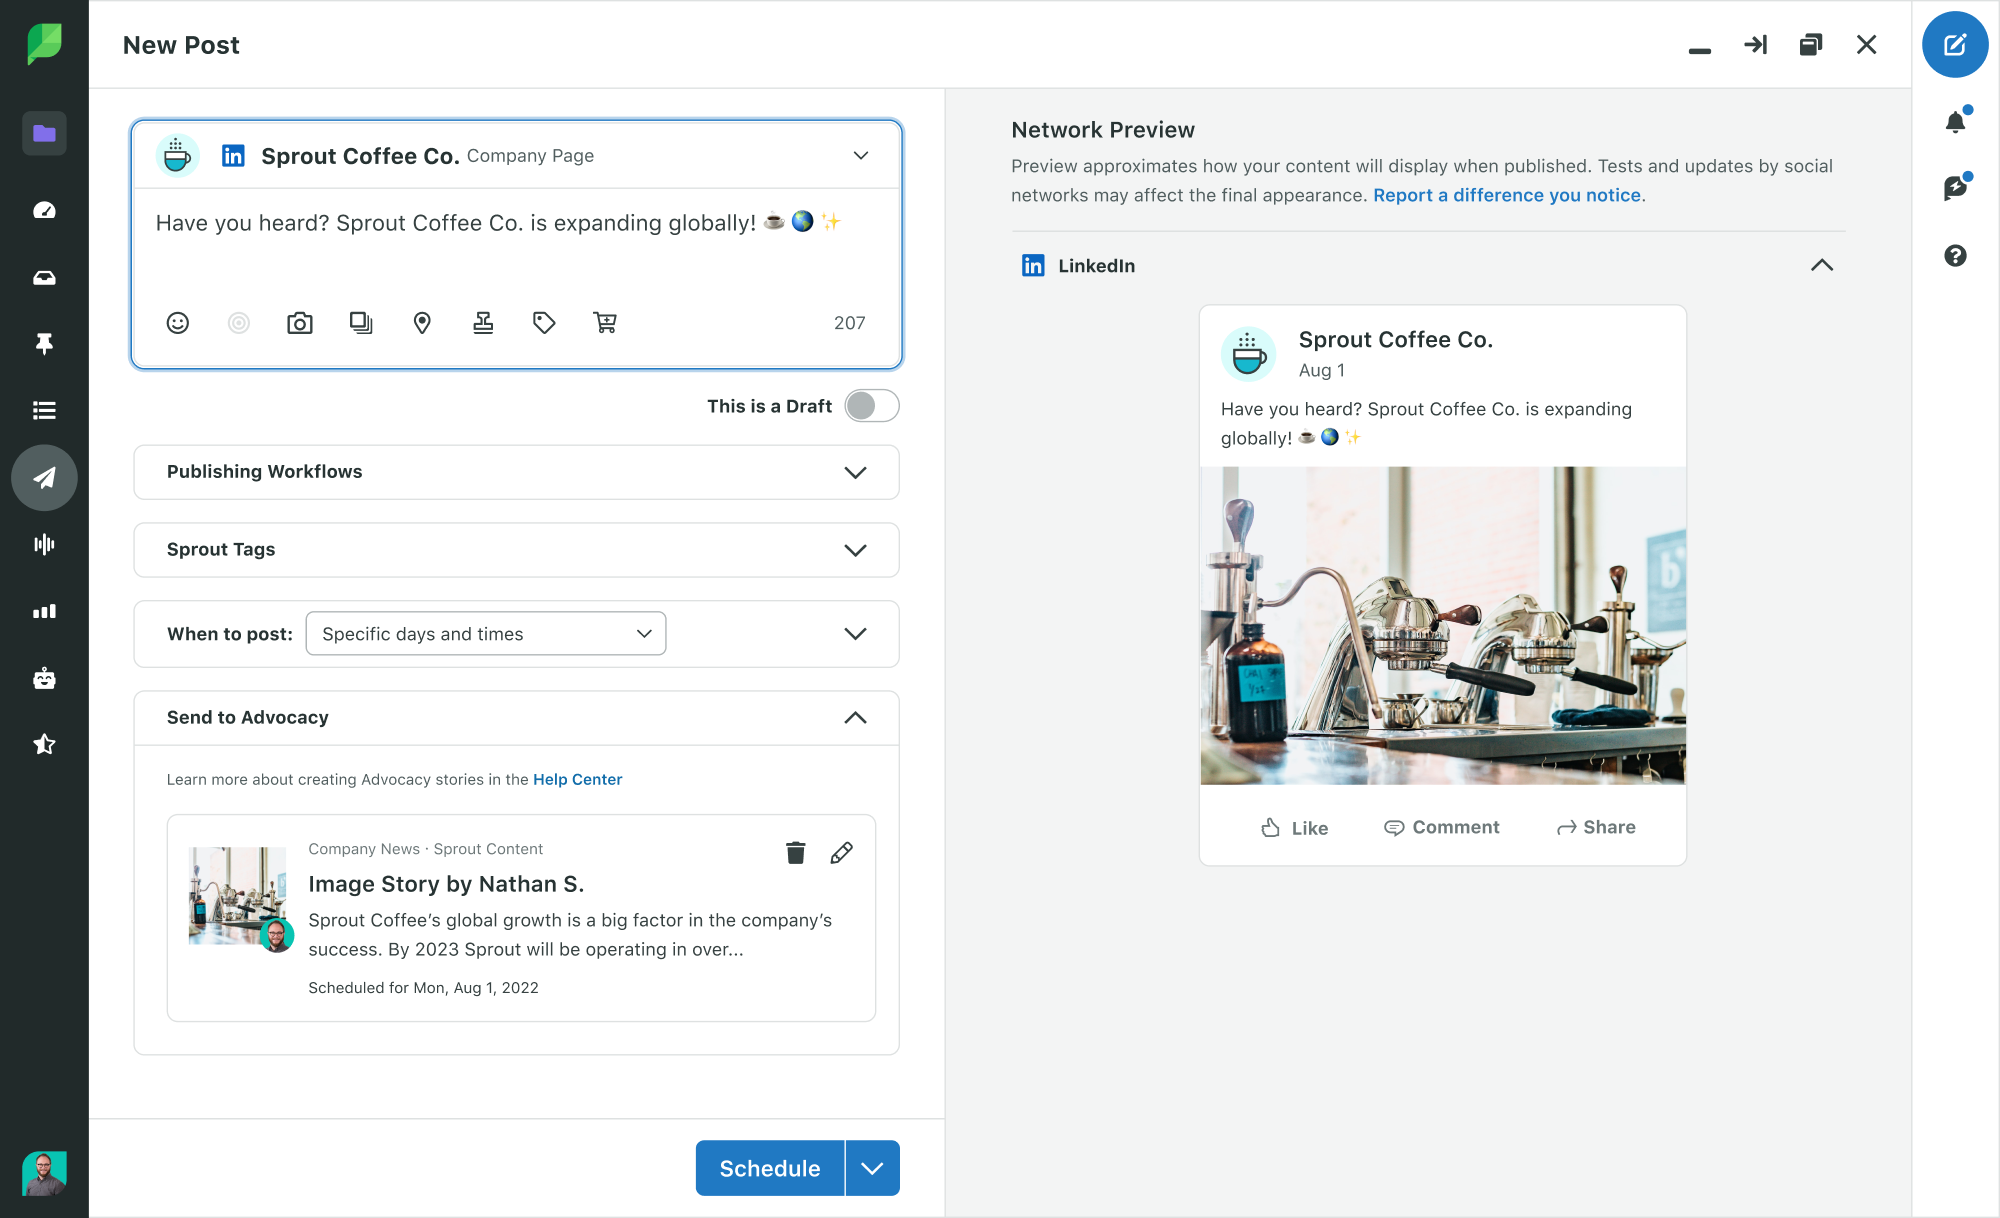 A screenshot showing the integration of Employee Advocacy and Sprout where you can send curated posts for employees to the Advocacy program directly from Sprout's compose window.